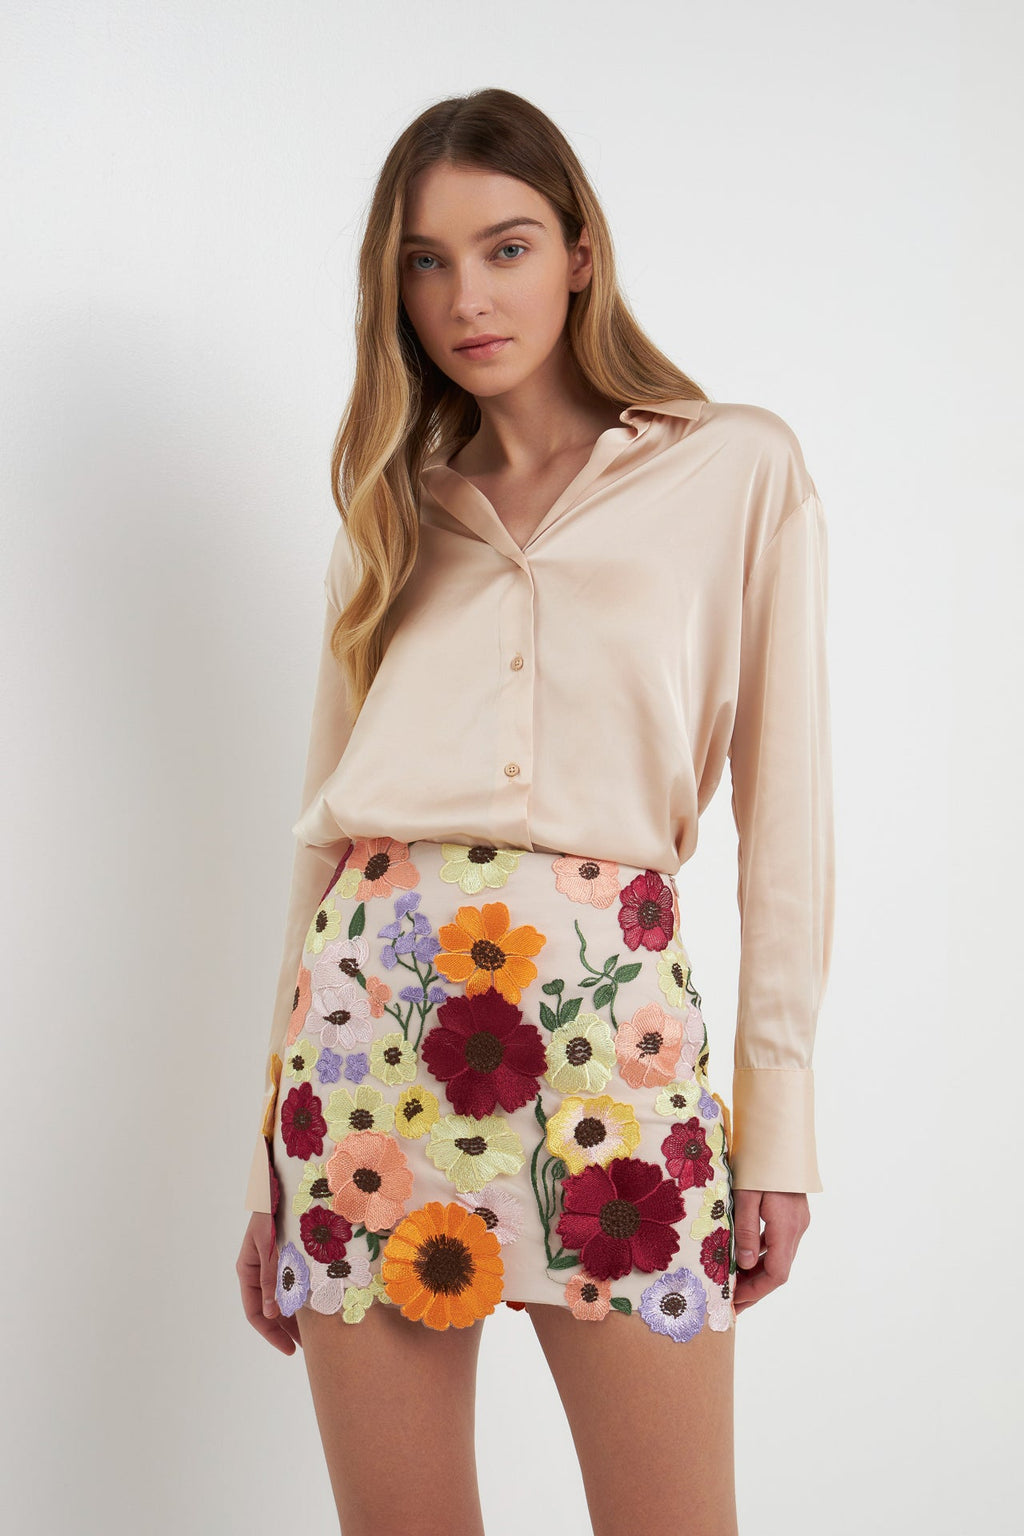 Floral Embroidered Mini Skirt